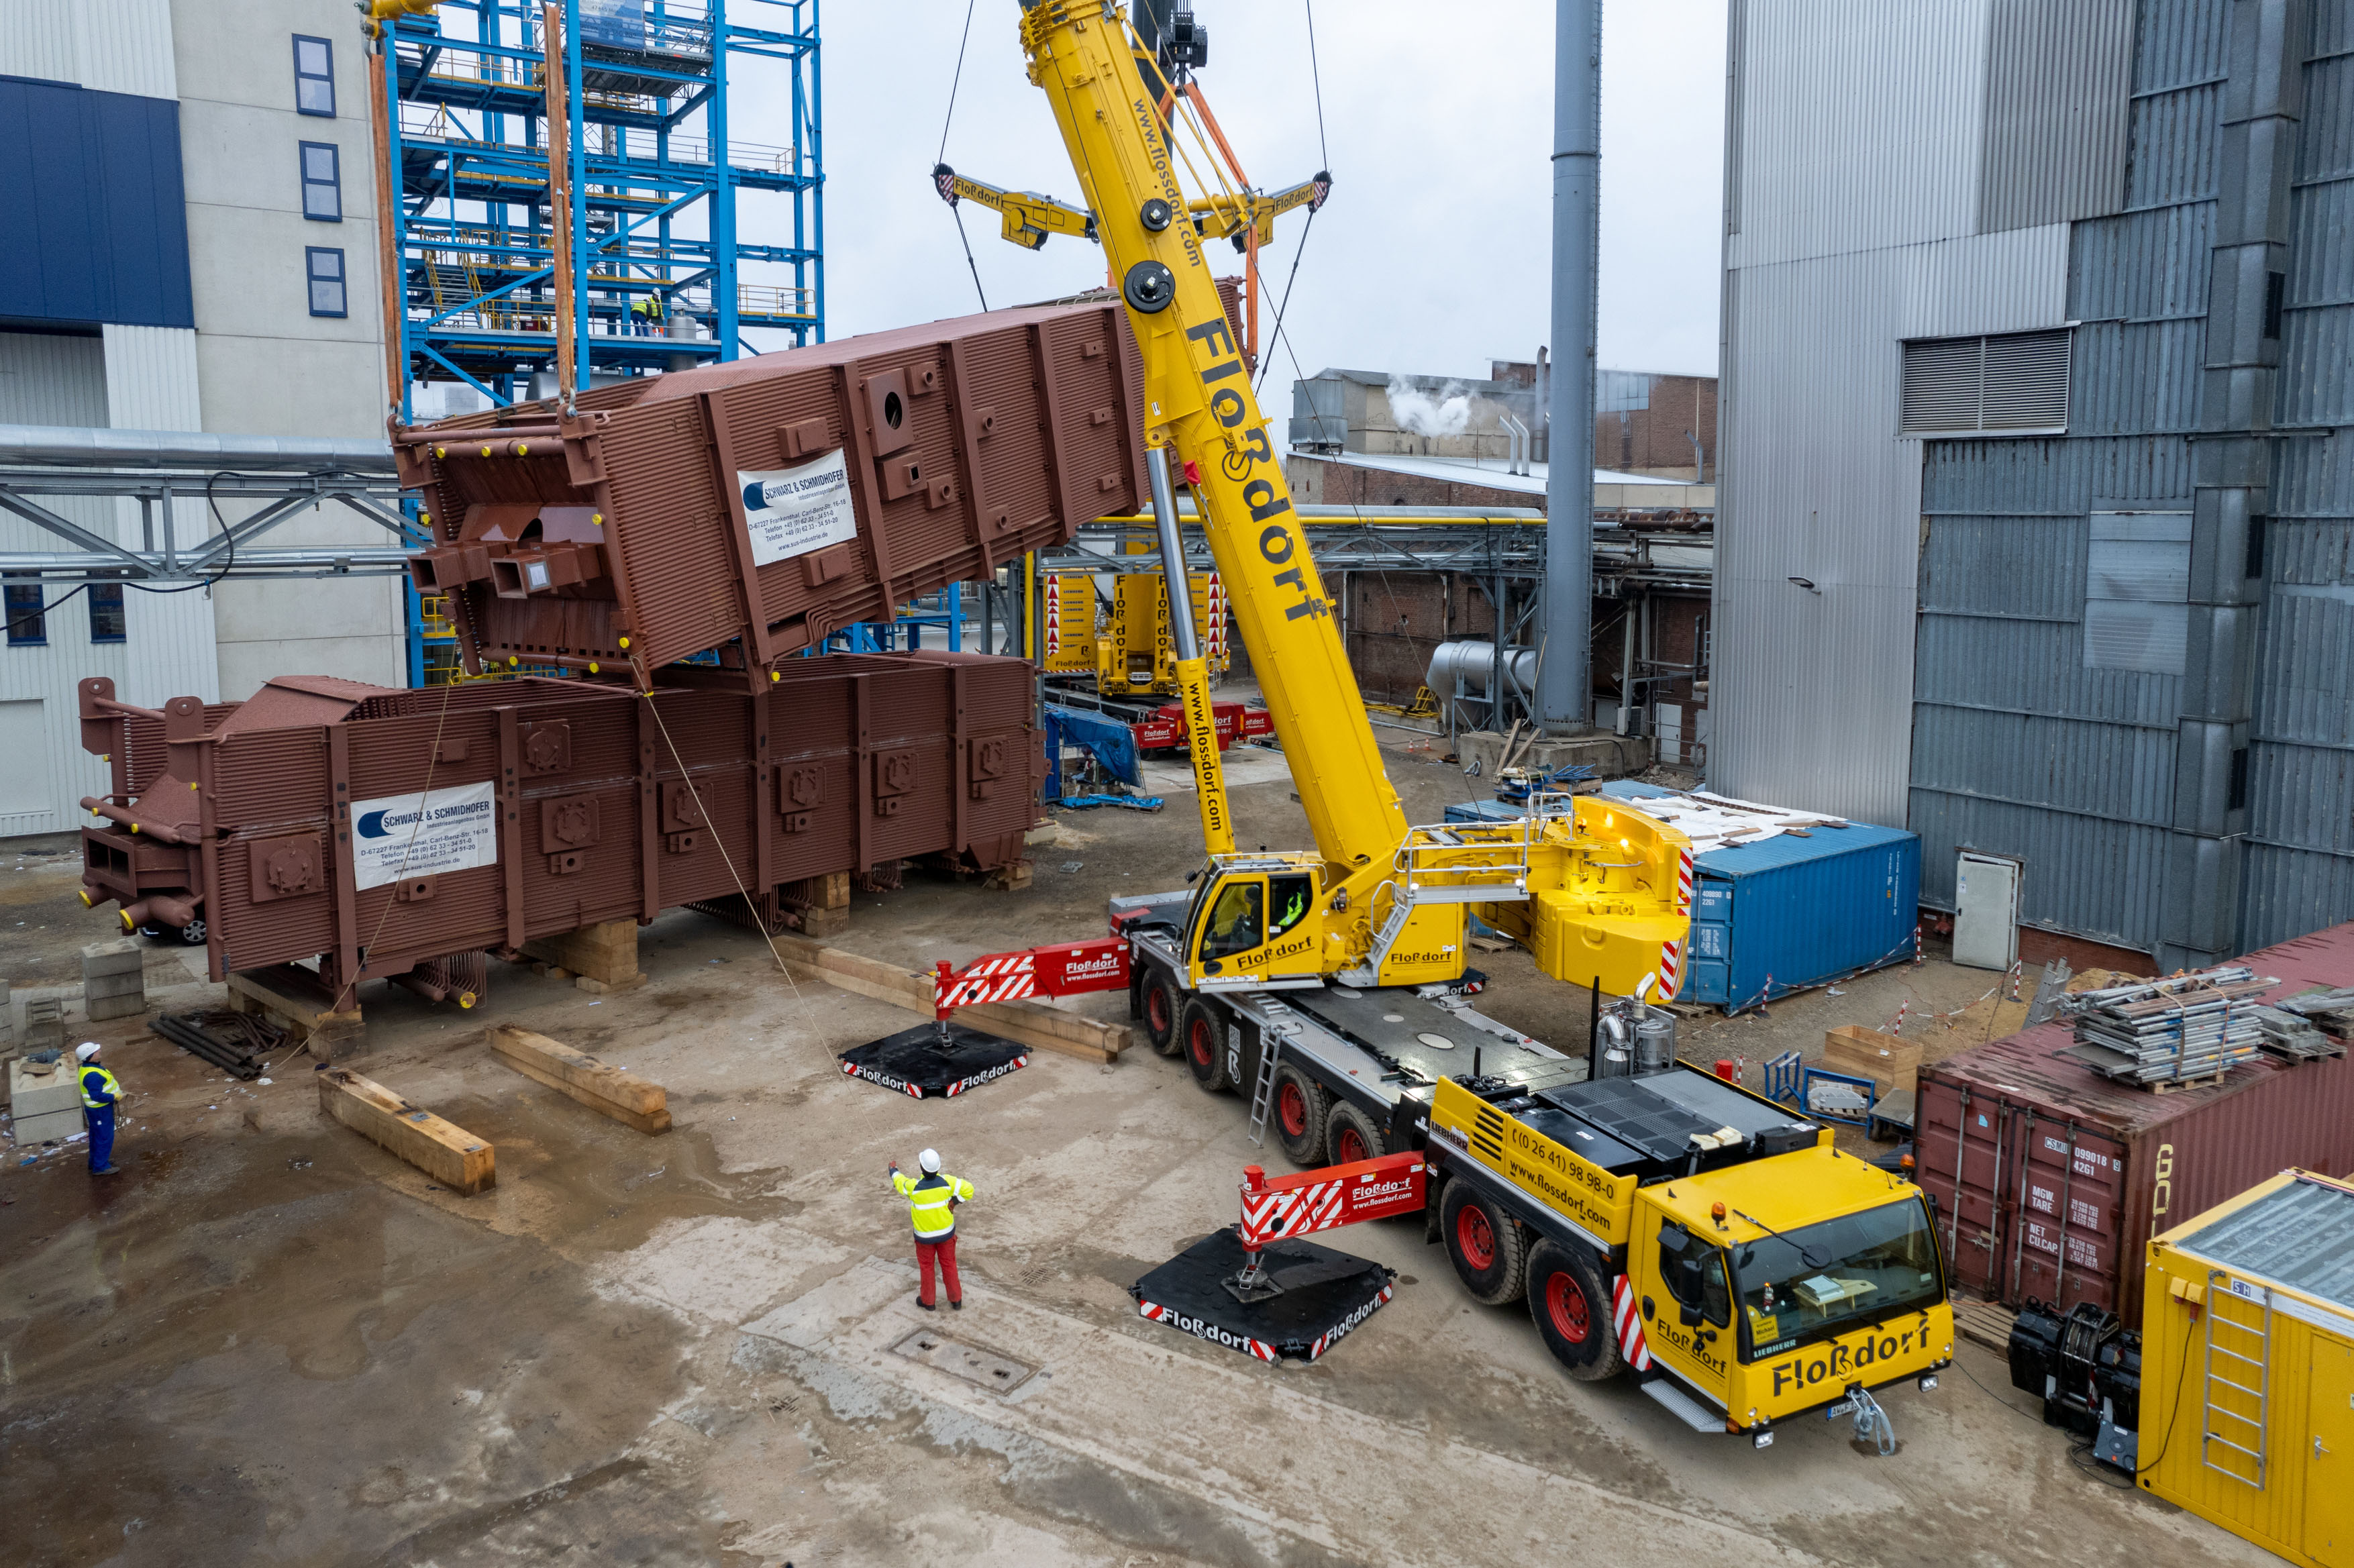 Power over the rear: like something out of a textbook, the LTM 1300-6.3 operated by Dietmar Floßdorf GmbH & Co. KG uses the strong rear VarioBase®Plus supports to lift an almost 100-tonne boiler at the new power plant together with the LTM 1650- 8.1.